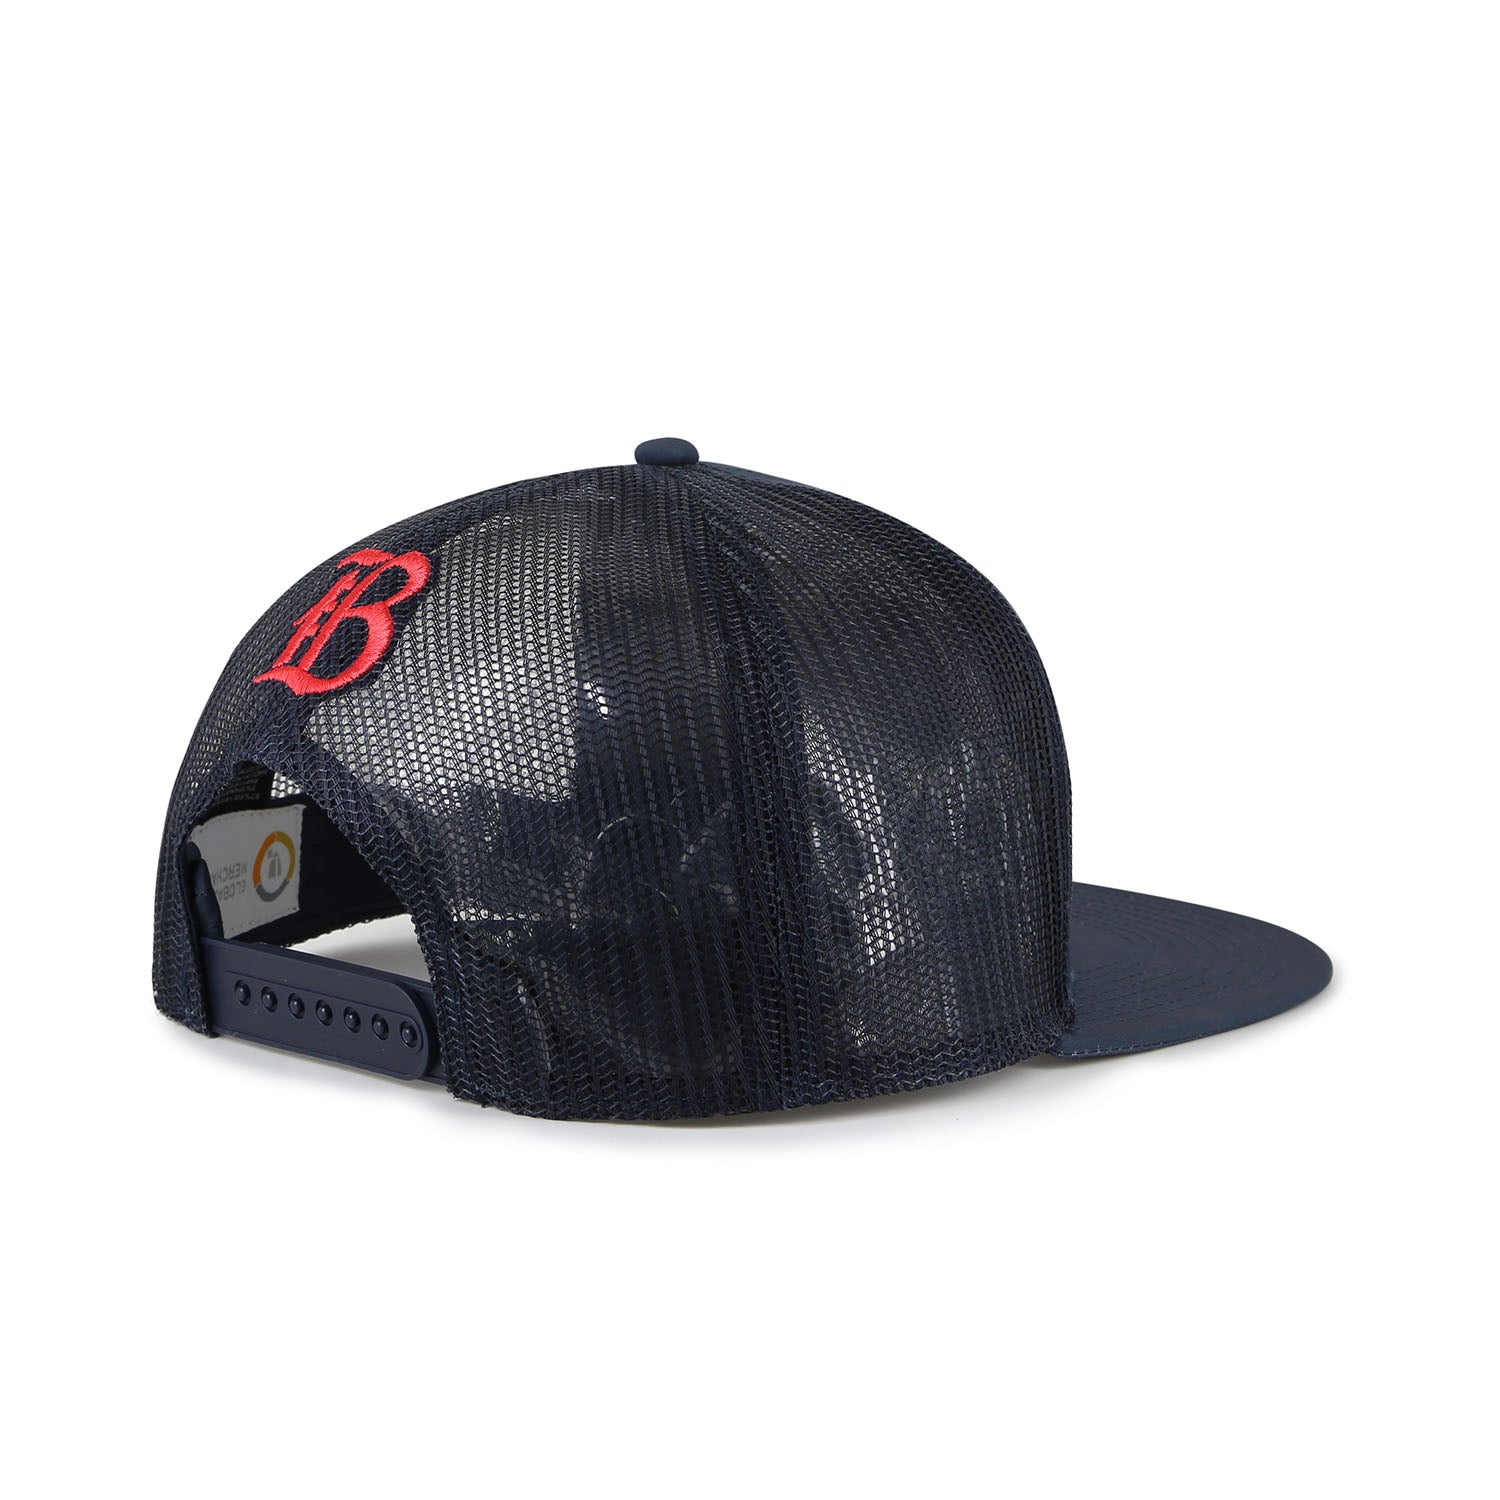 Adult The Game Bay FC Navy Trucker Hat - Angled Rear Right Side View